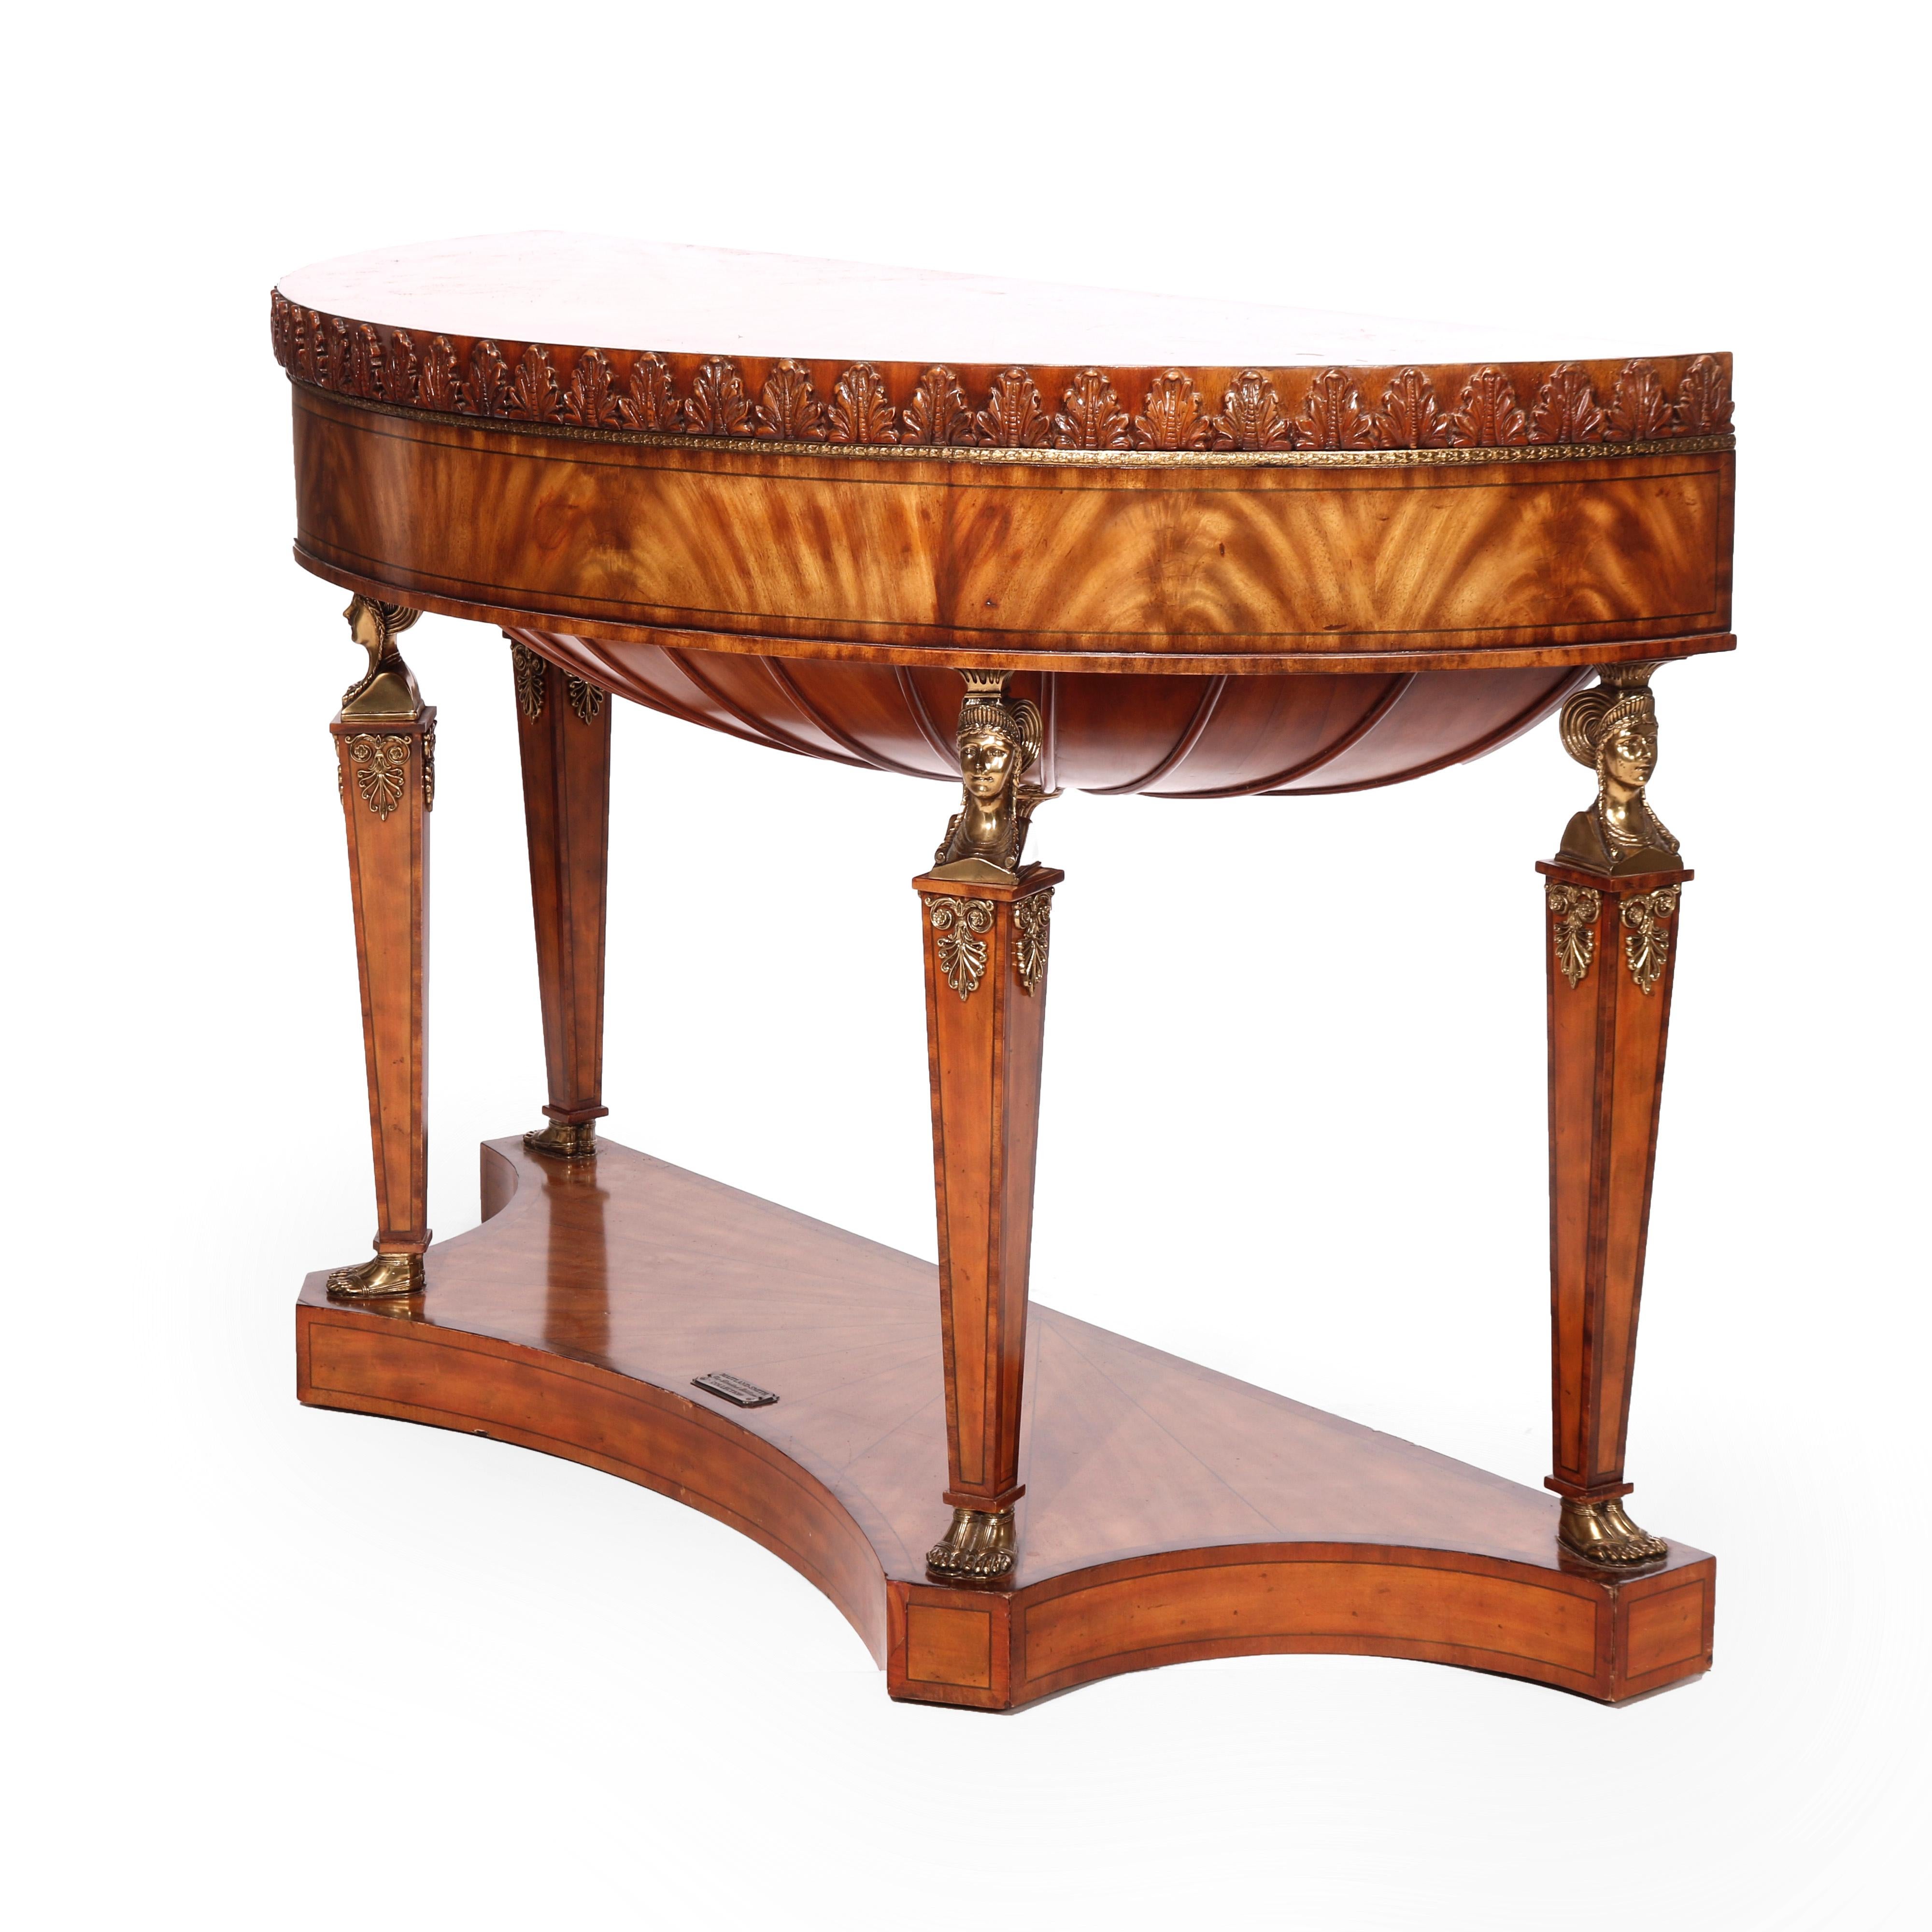 A French Empire style console table by Maitland Smith of the 